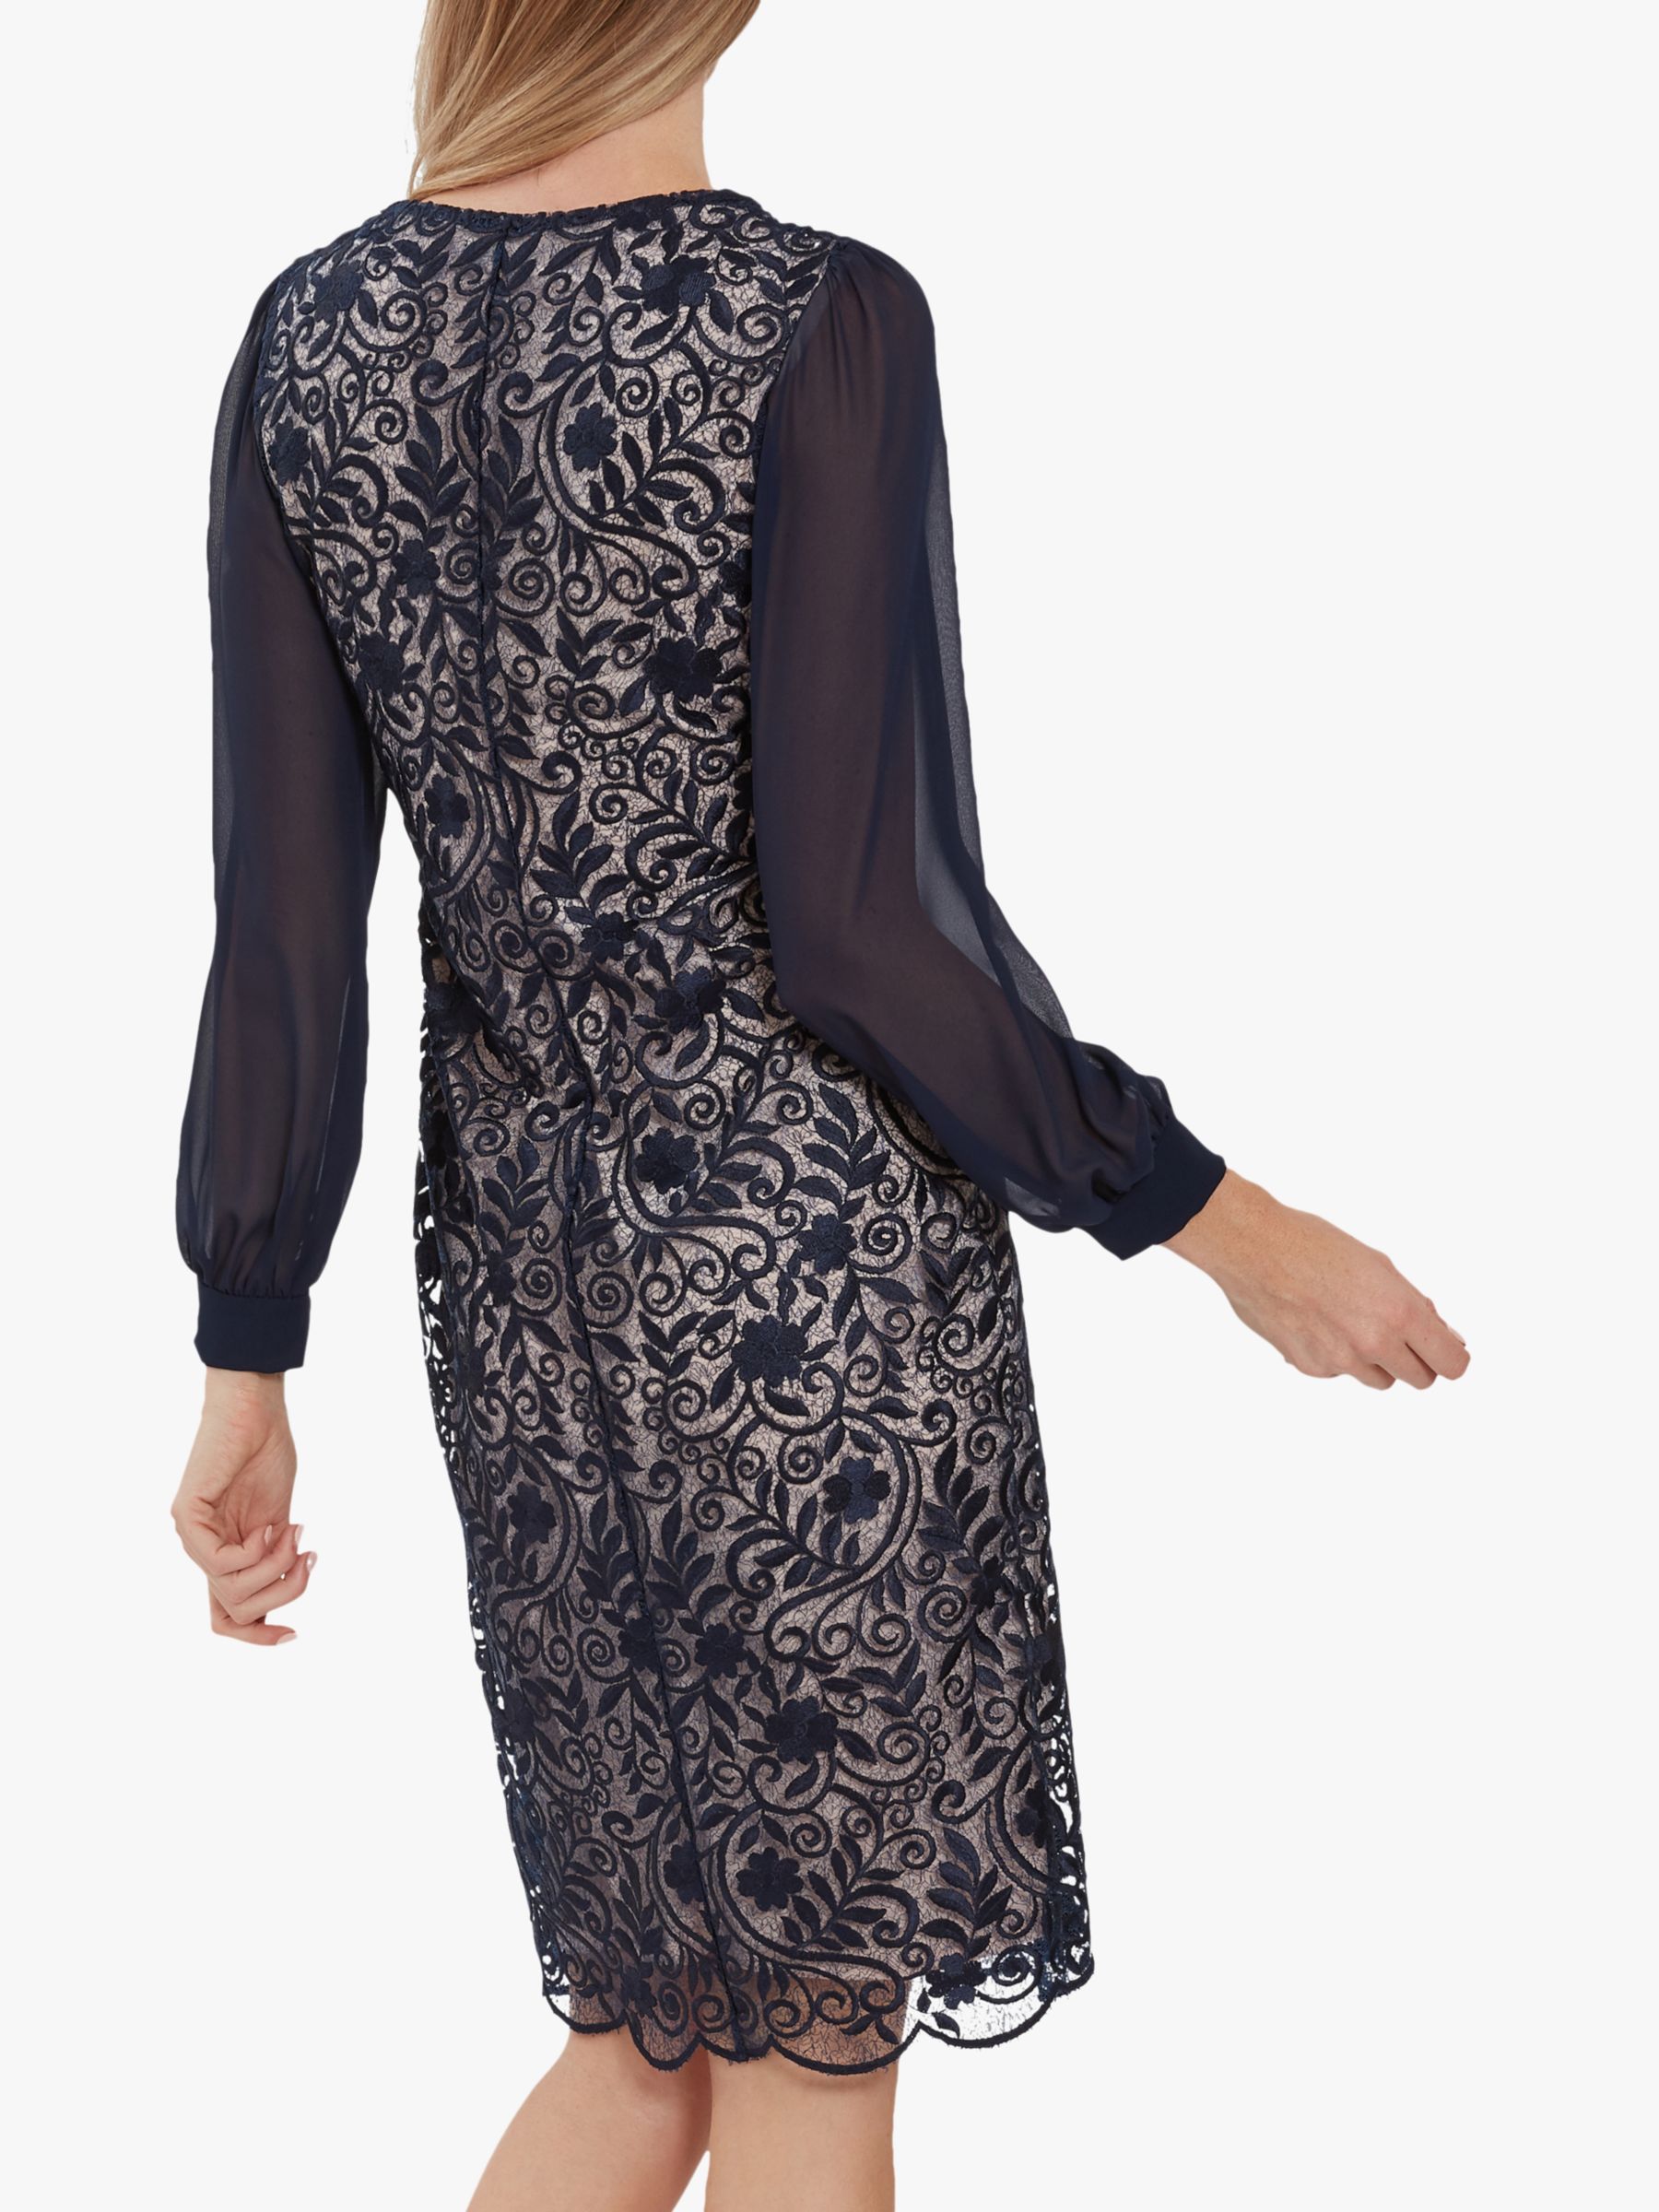 Buy Gina Bacconi Mozelle Embroidered Floral Midi Dress Online at johnlewis.com